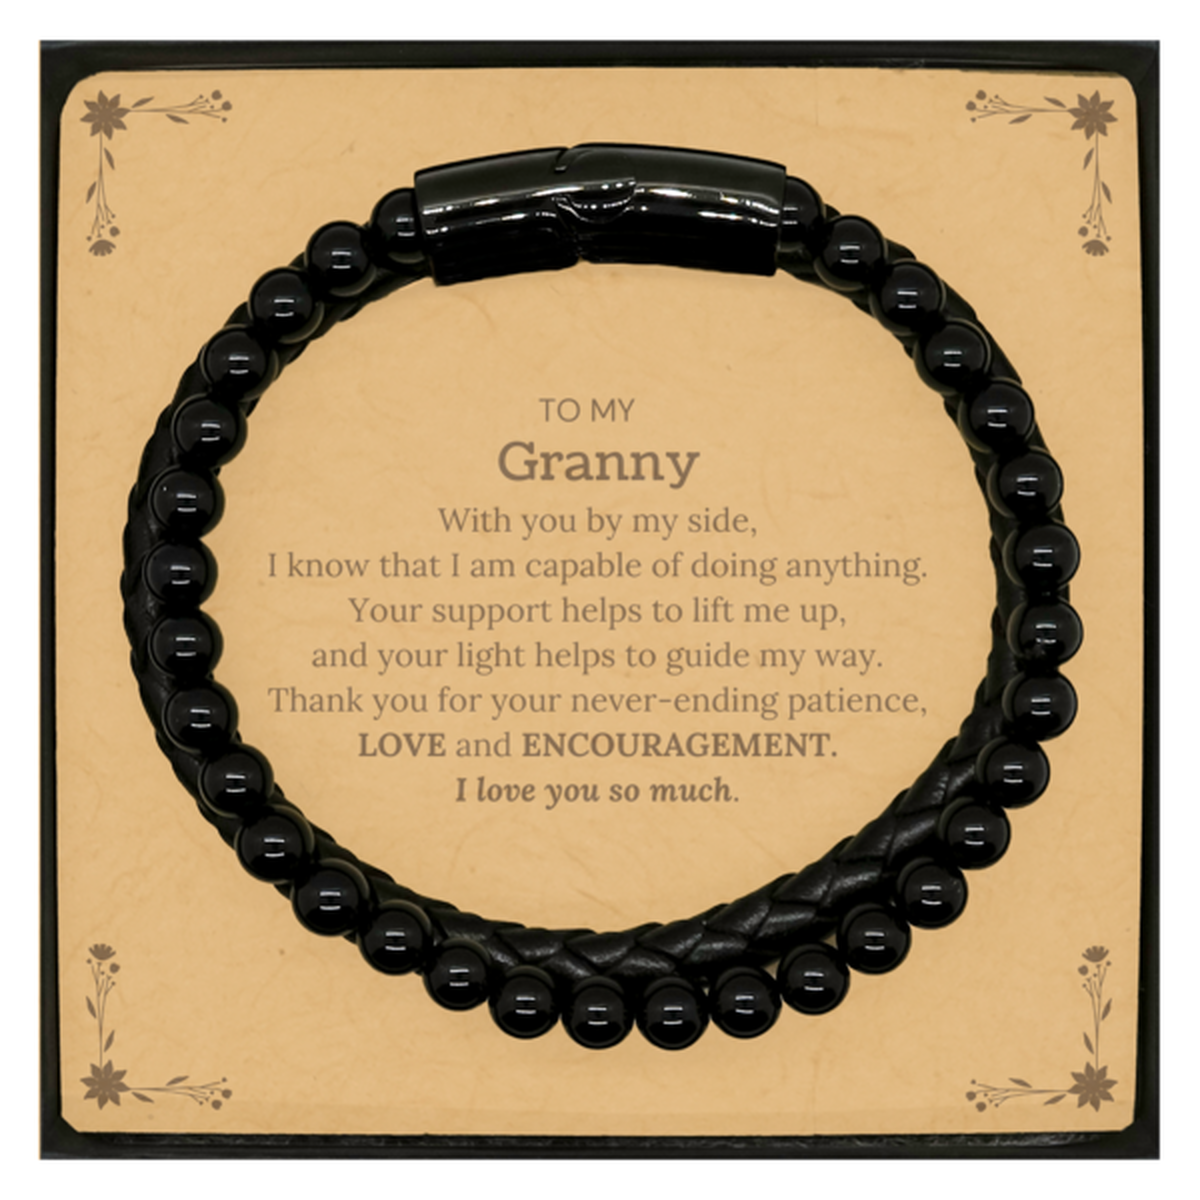 Appreciation Granny Stone Leather Bracelets Gifts, To My Granny Birthday Christmas Wedding Keepsake Gifts for Granny With you by my side, I know that I am capable of doing anything. I love you so much